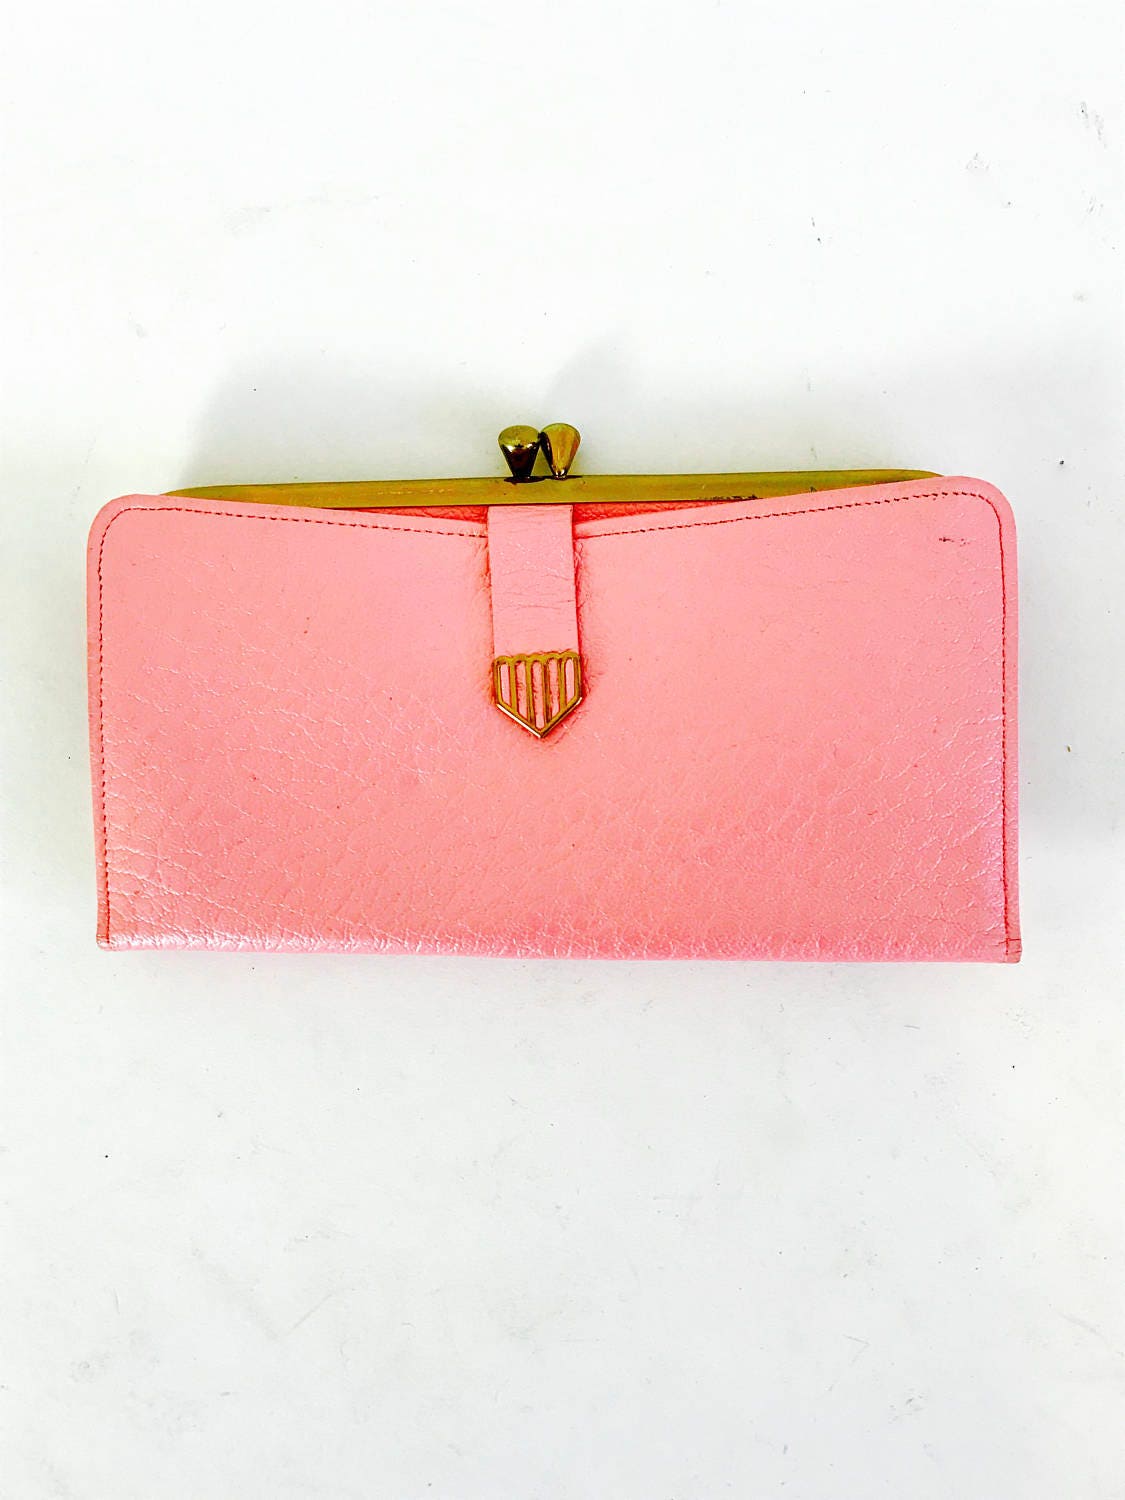 Vintage 50s Pink Leather Long Wallet Large Snap Coin Purse Billfold 1950s  Bright Bubblegum Cowhide Clutch Checkbook Cover Credit Card Holder